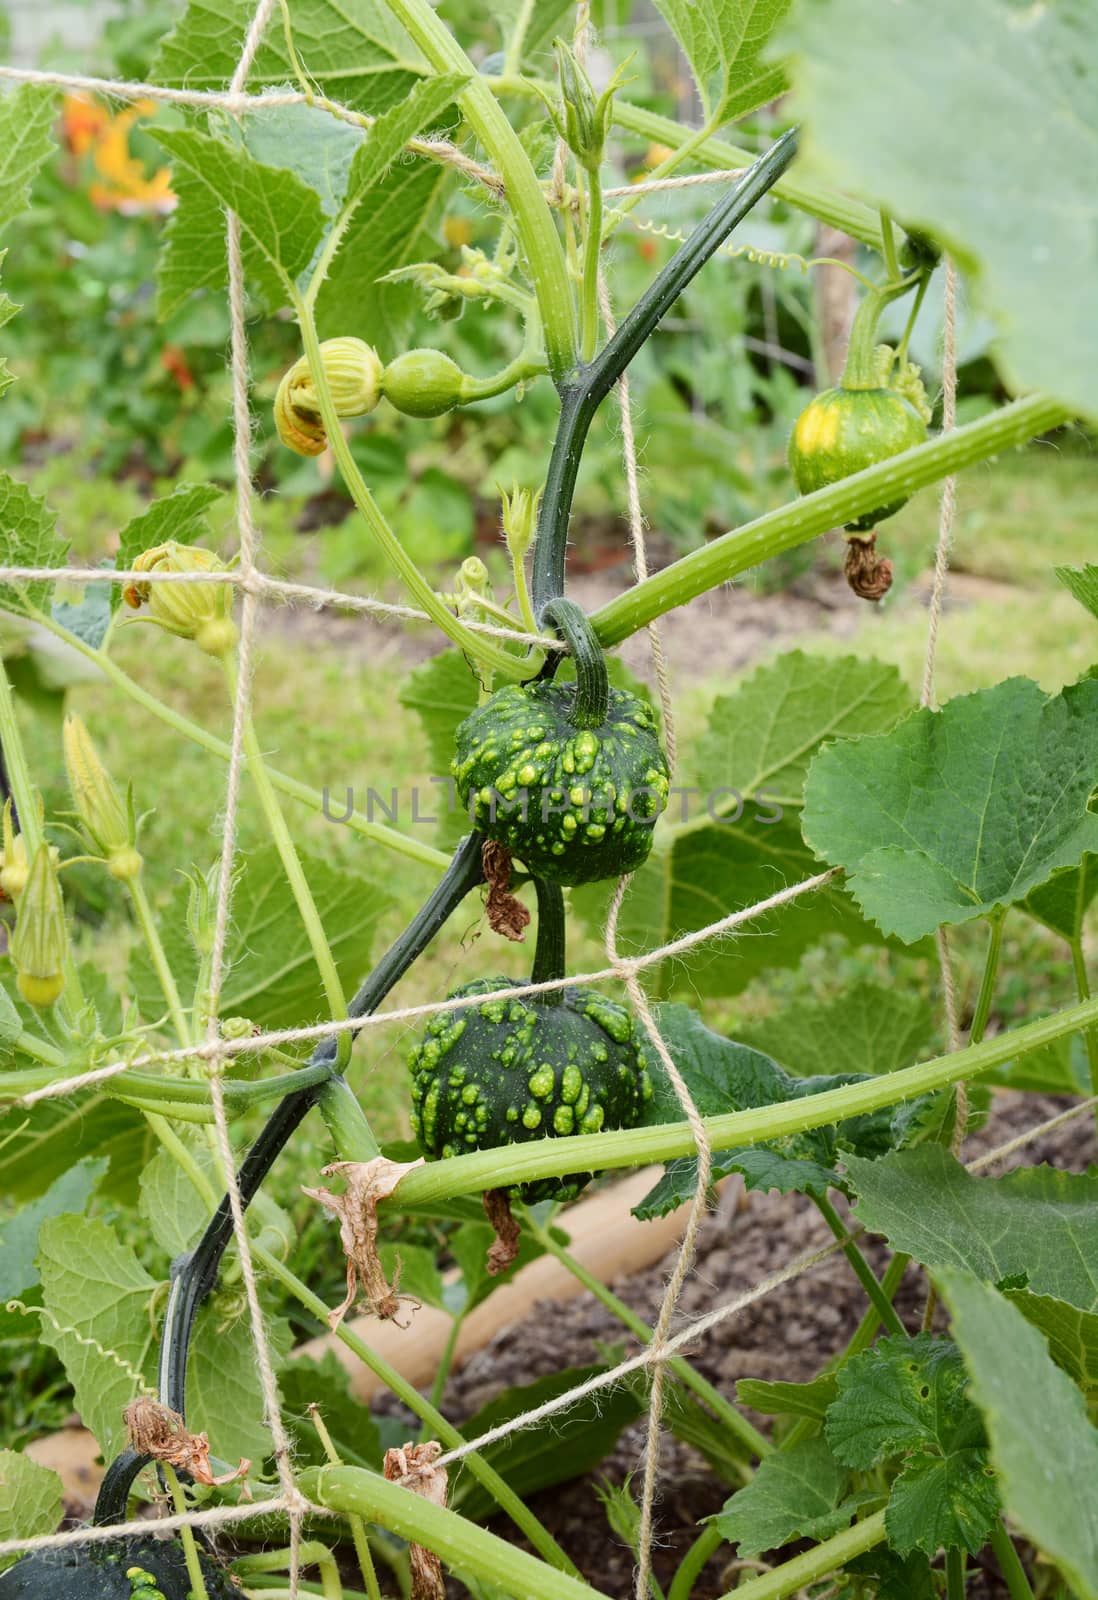 Dark green warted ornamental gourds grow on spiky vines, hanging from twine trellis in a rural allotment garden